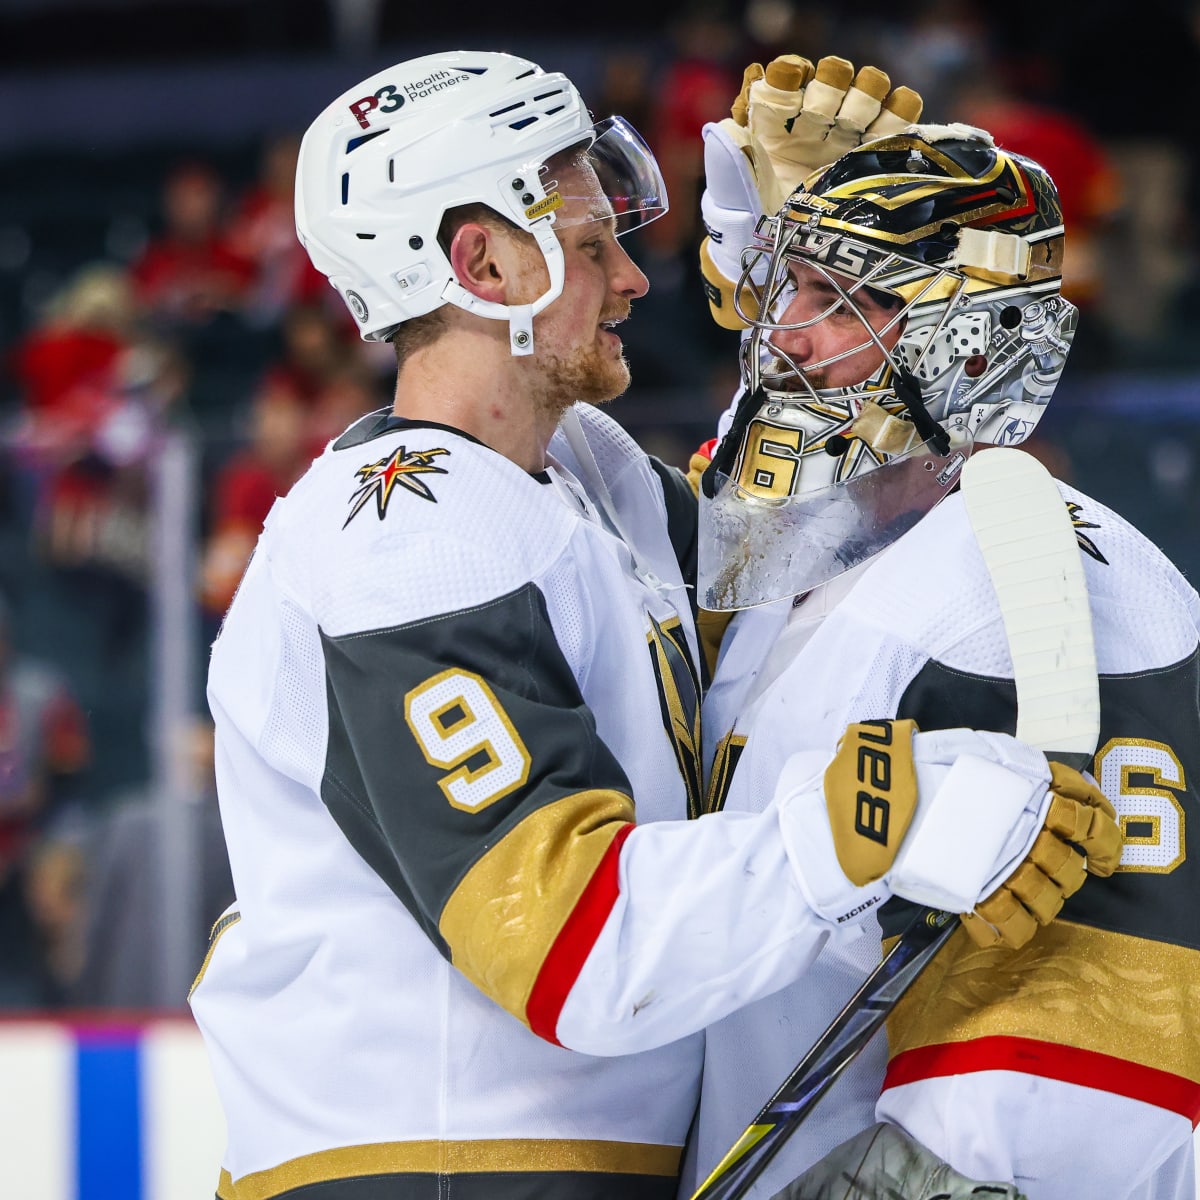 Vegas Golden Knights may get franchise goalie, young roster